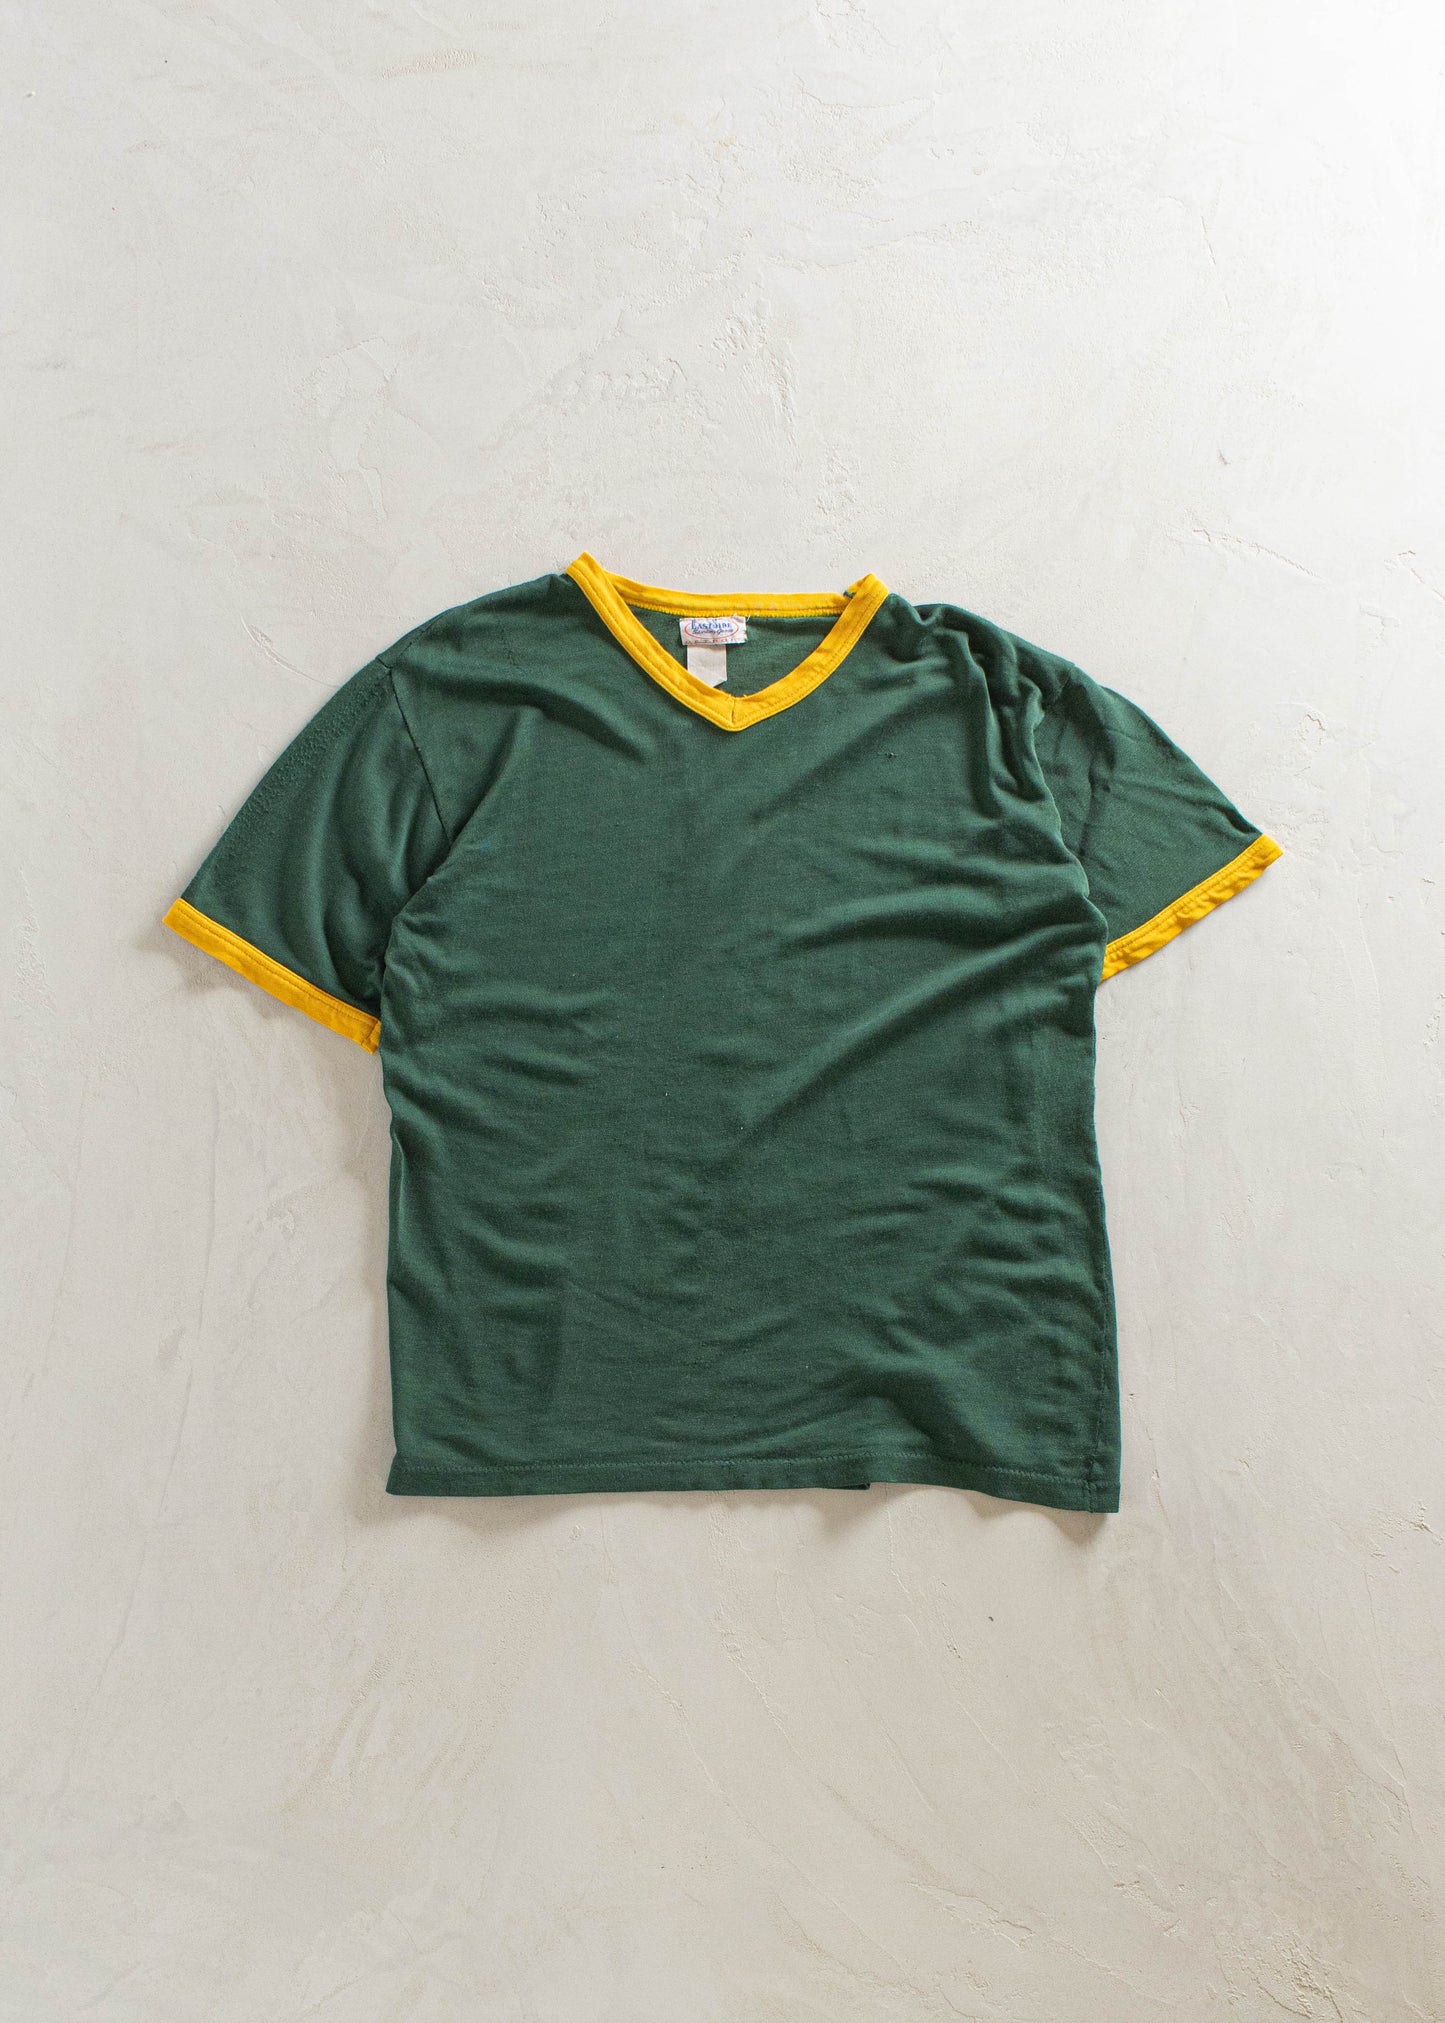 1980s East Side Sporting Goods Sport Jersey Size M/L